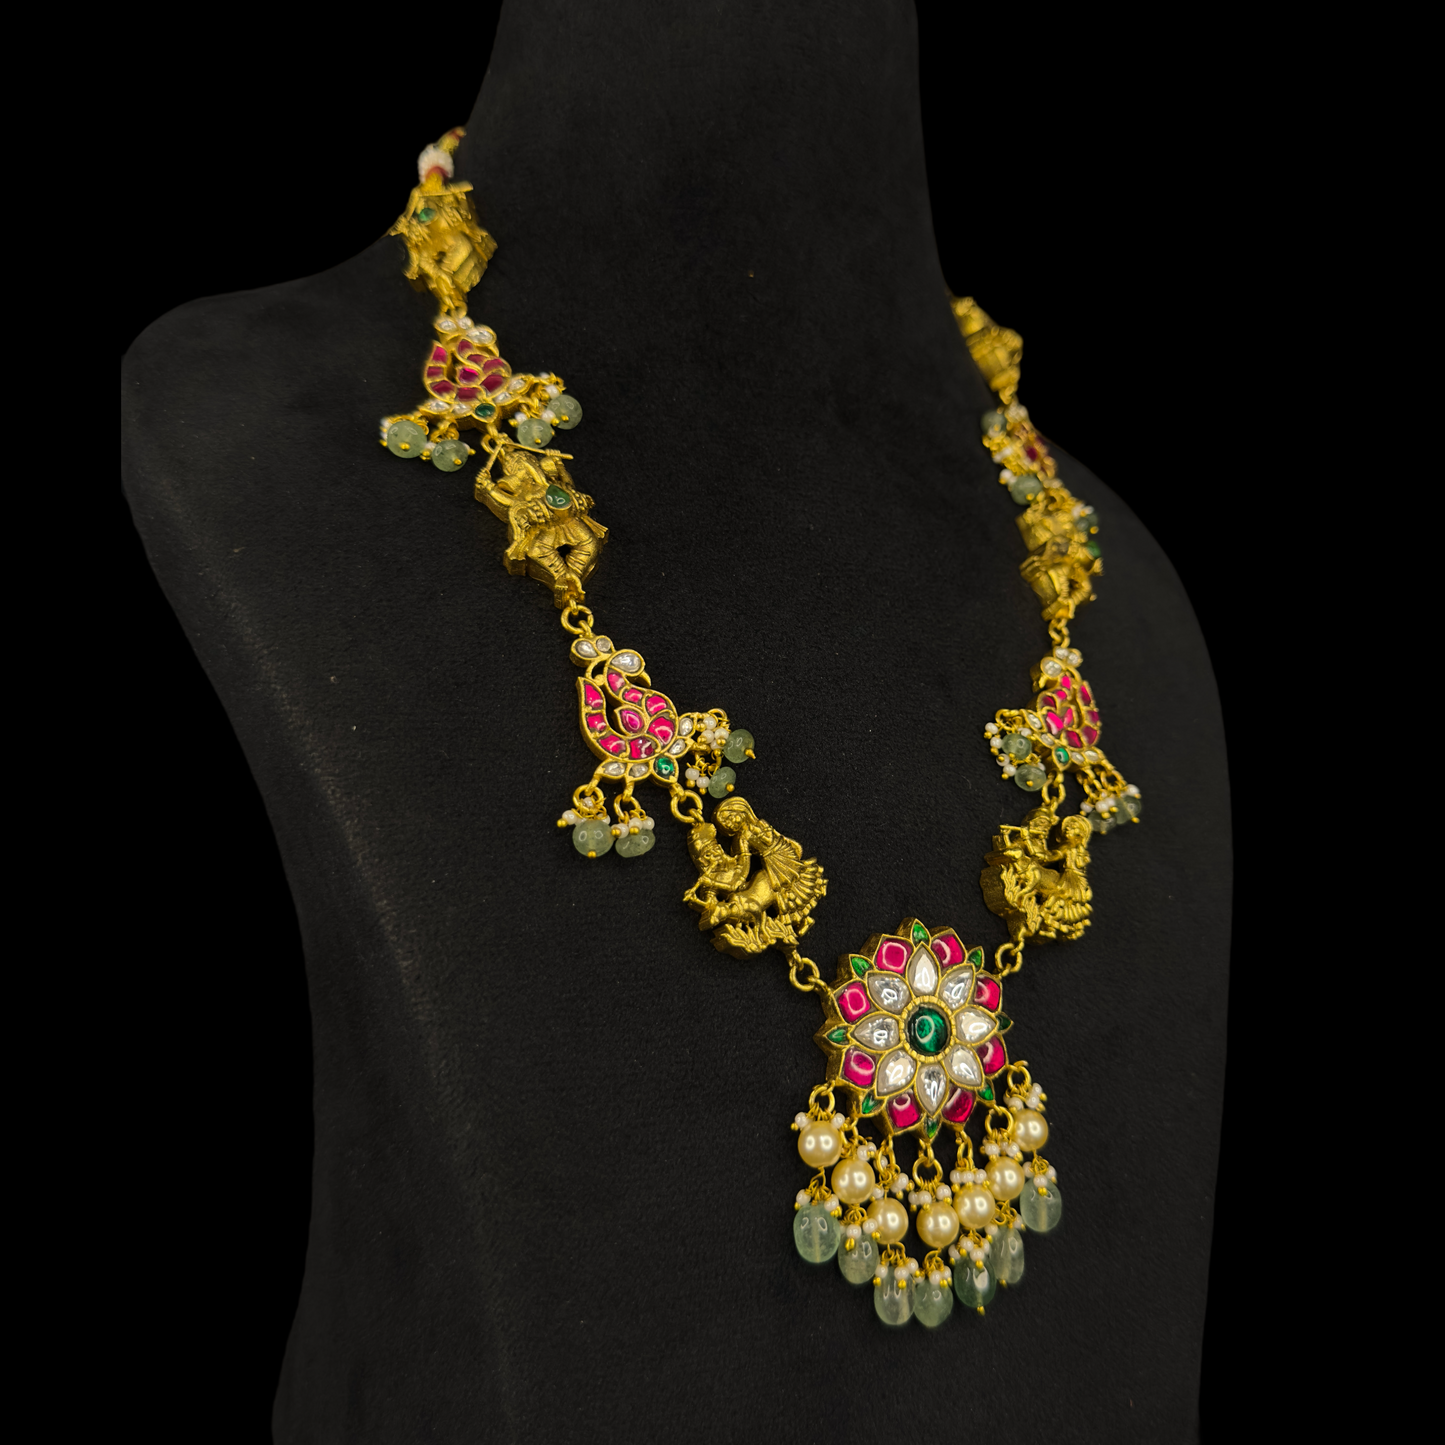 Nakshi Jadau Kundan Necklace with Peacock and Floral Motifs with 22k gold plating This Product Belongs to Jadau Kundan Jewellery Category